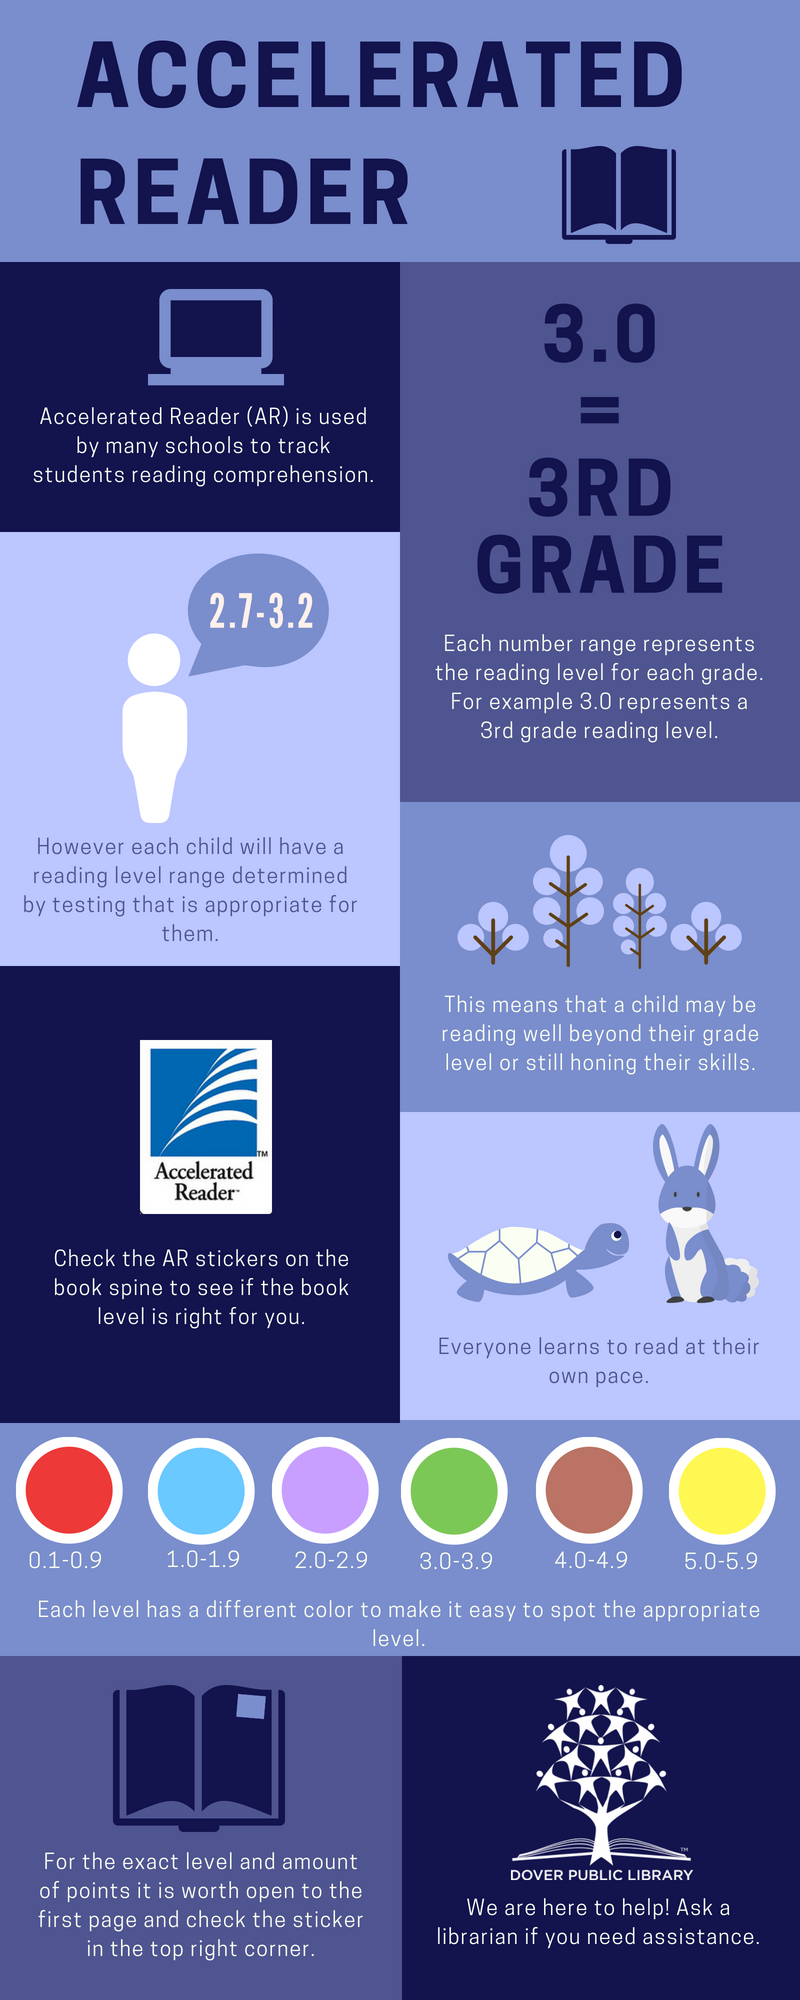 Accelerated Reader info graphic explains how accelerated reader works and how to find a book in your level at the library